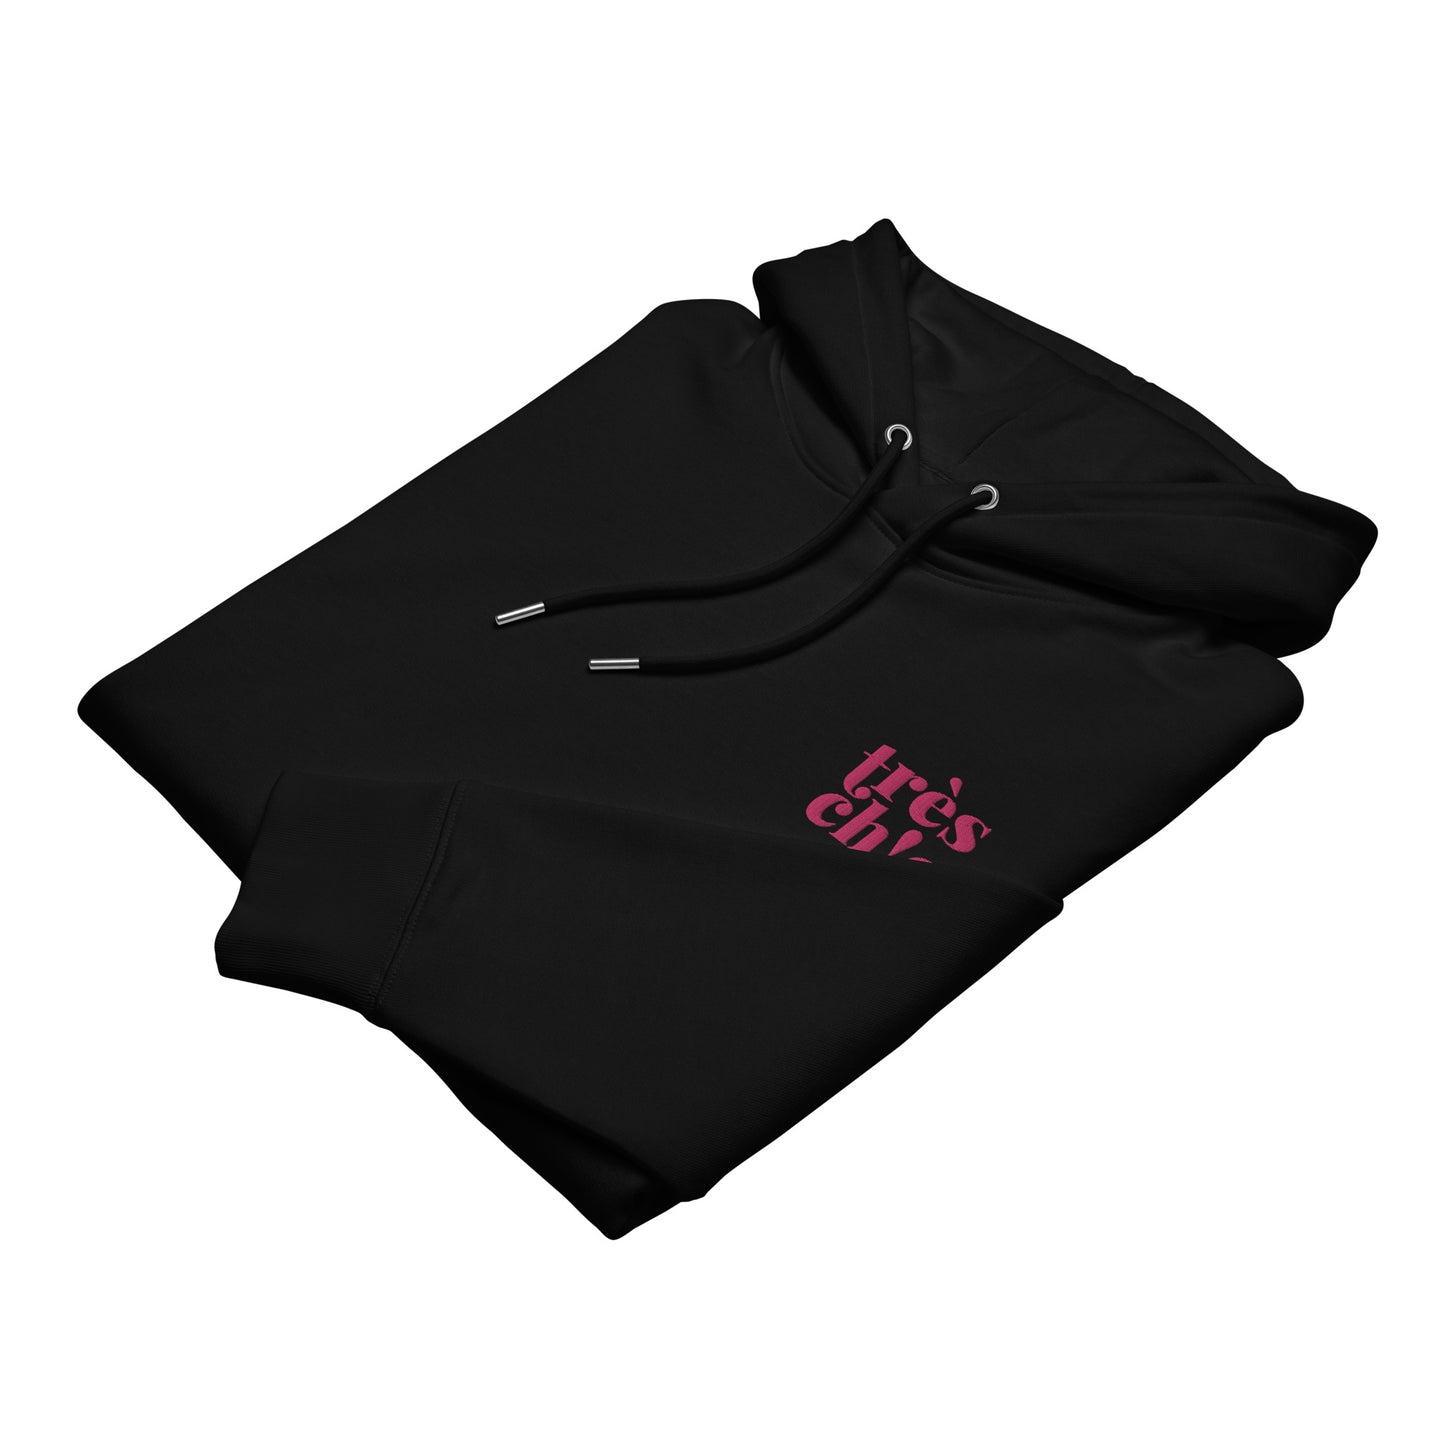 Unisex eco-friendly black hoodie featuring on the upper left chest; Trés Chic embroidery in hot pink color, adding a touch of lgbtq to your outfit. sizes: small, medium, large, extra large, double extra large.